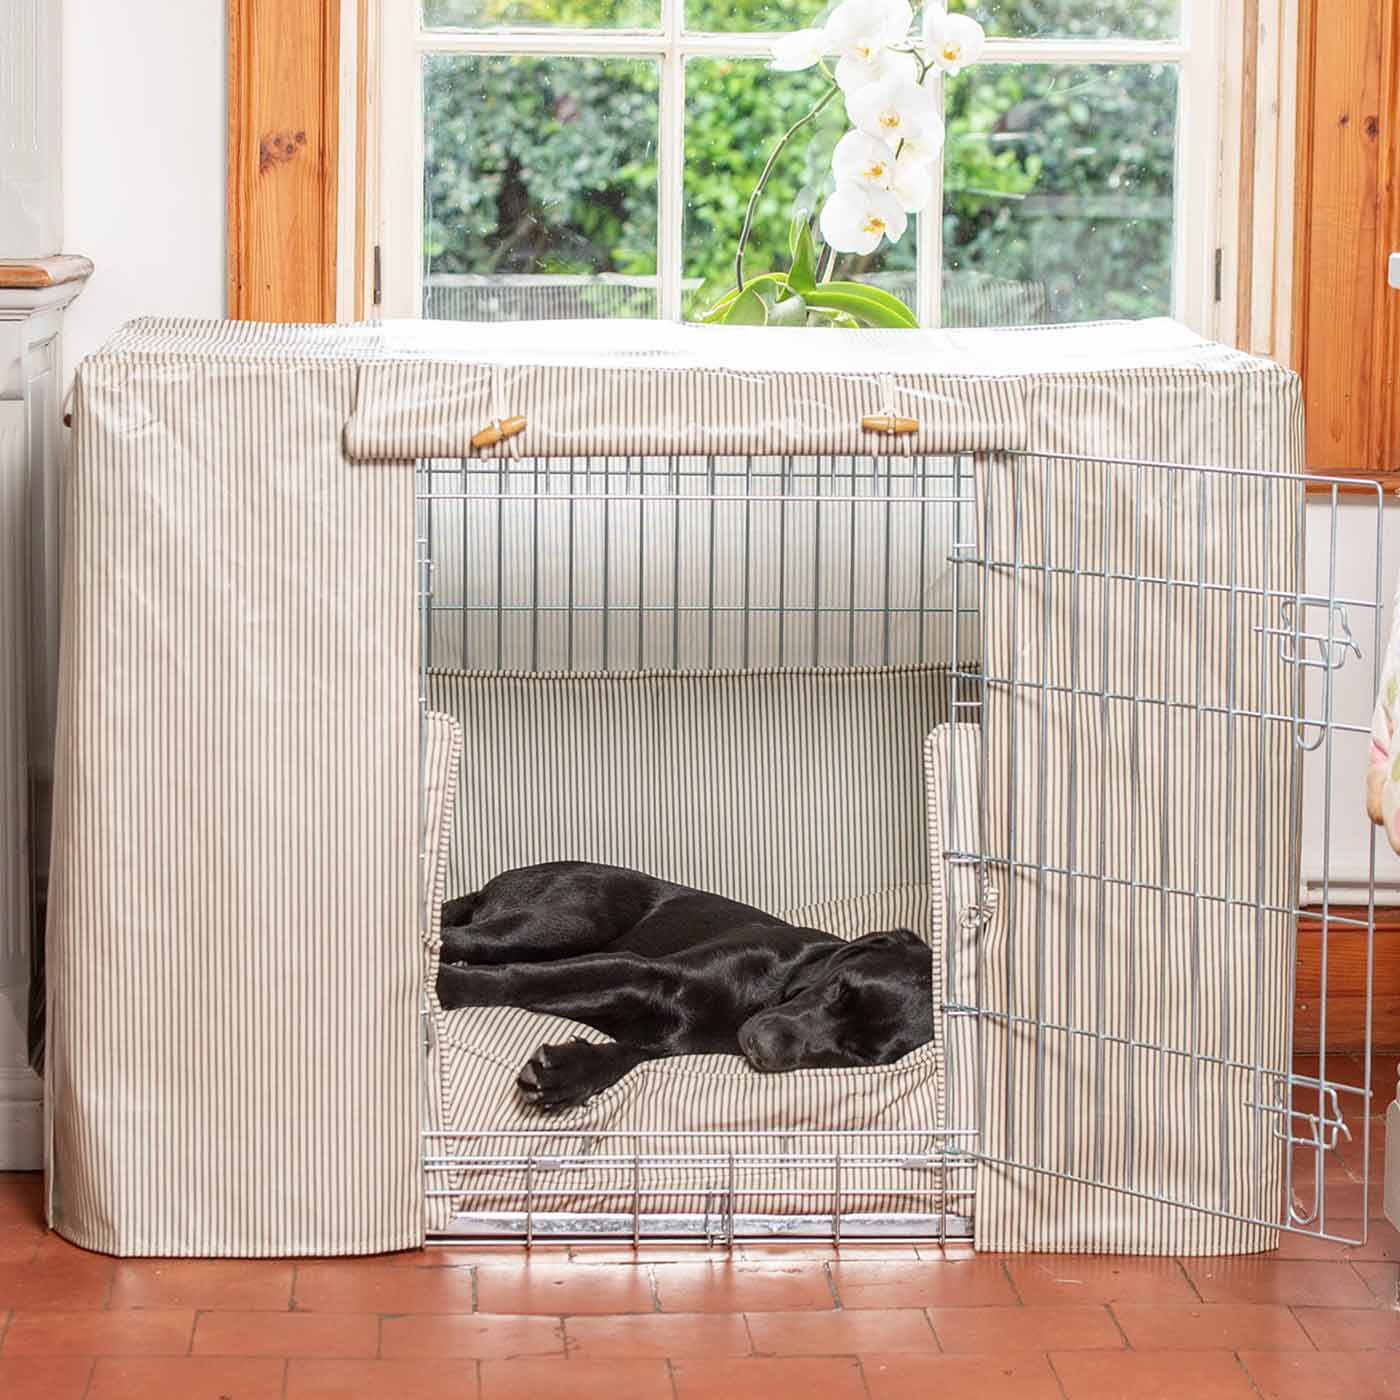 Luxury Dog Crate Cover, Regency Stripe Oil Cloth Crate Cover The Perfect Dog Crate Accessory, Available To Personalise Now at Lords & Labradors